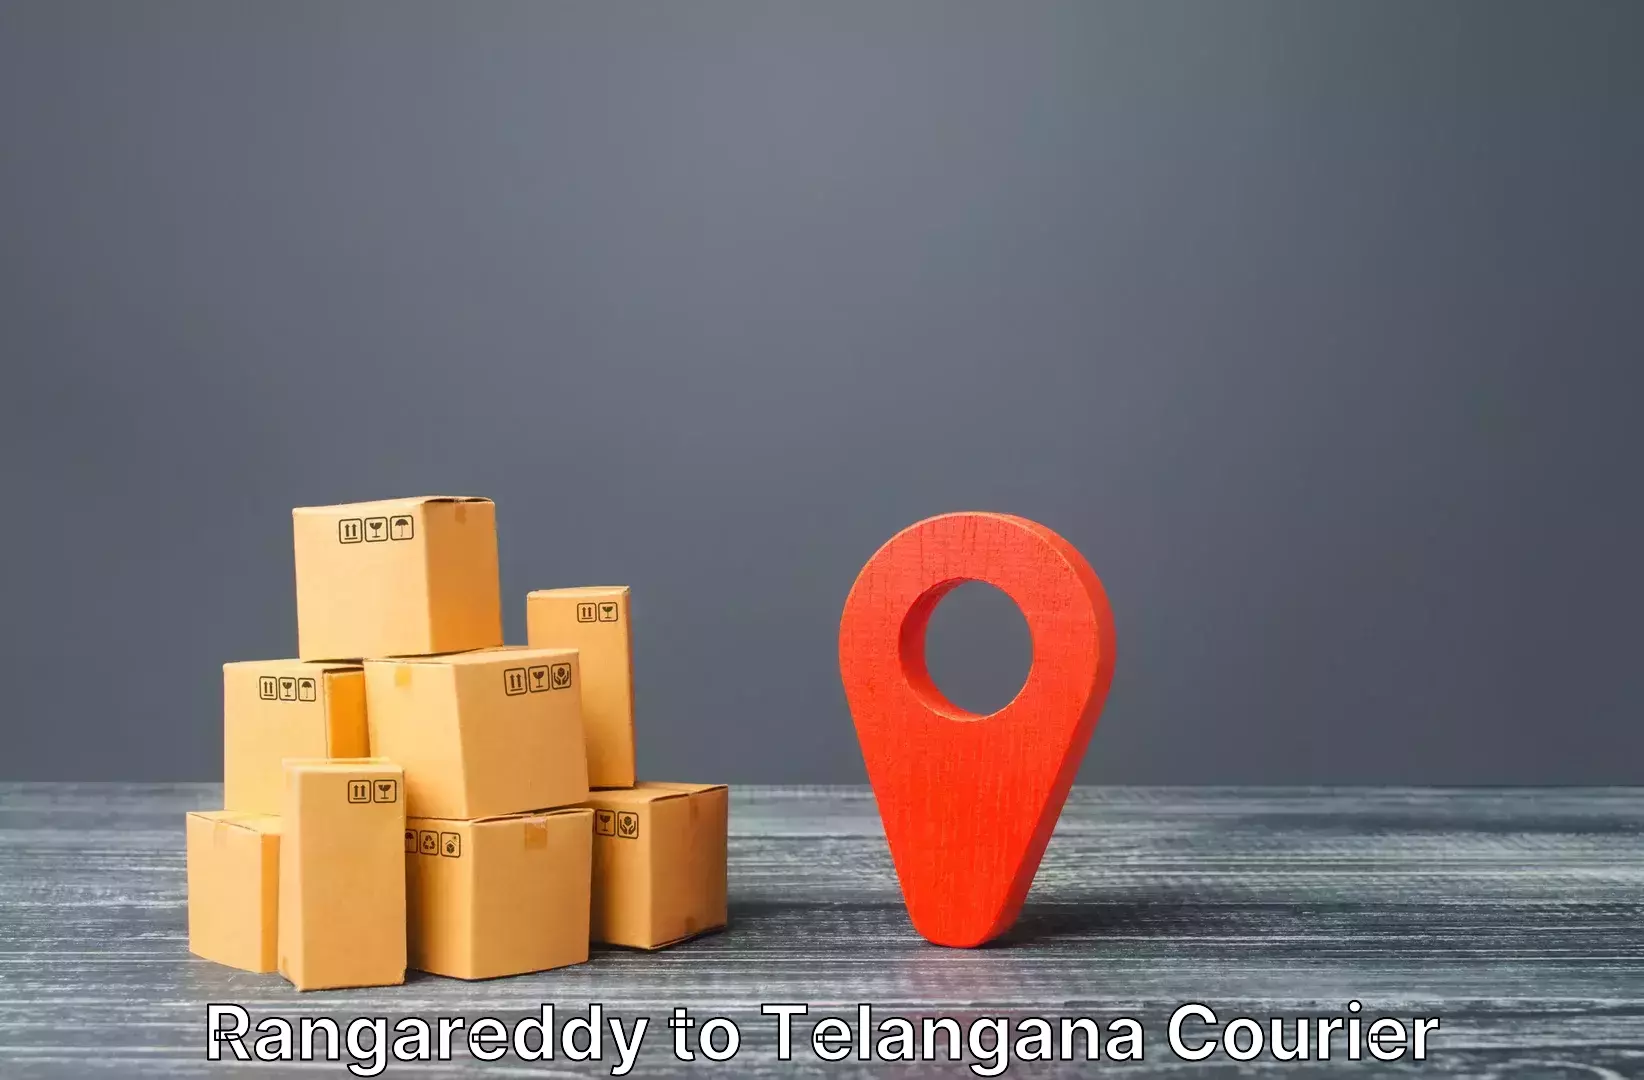 Luggage delivery optimization in Rangareddy to Moinabad